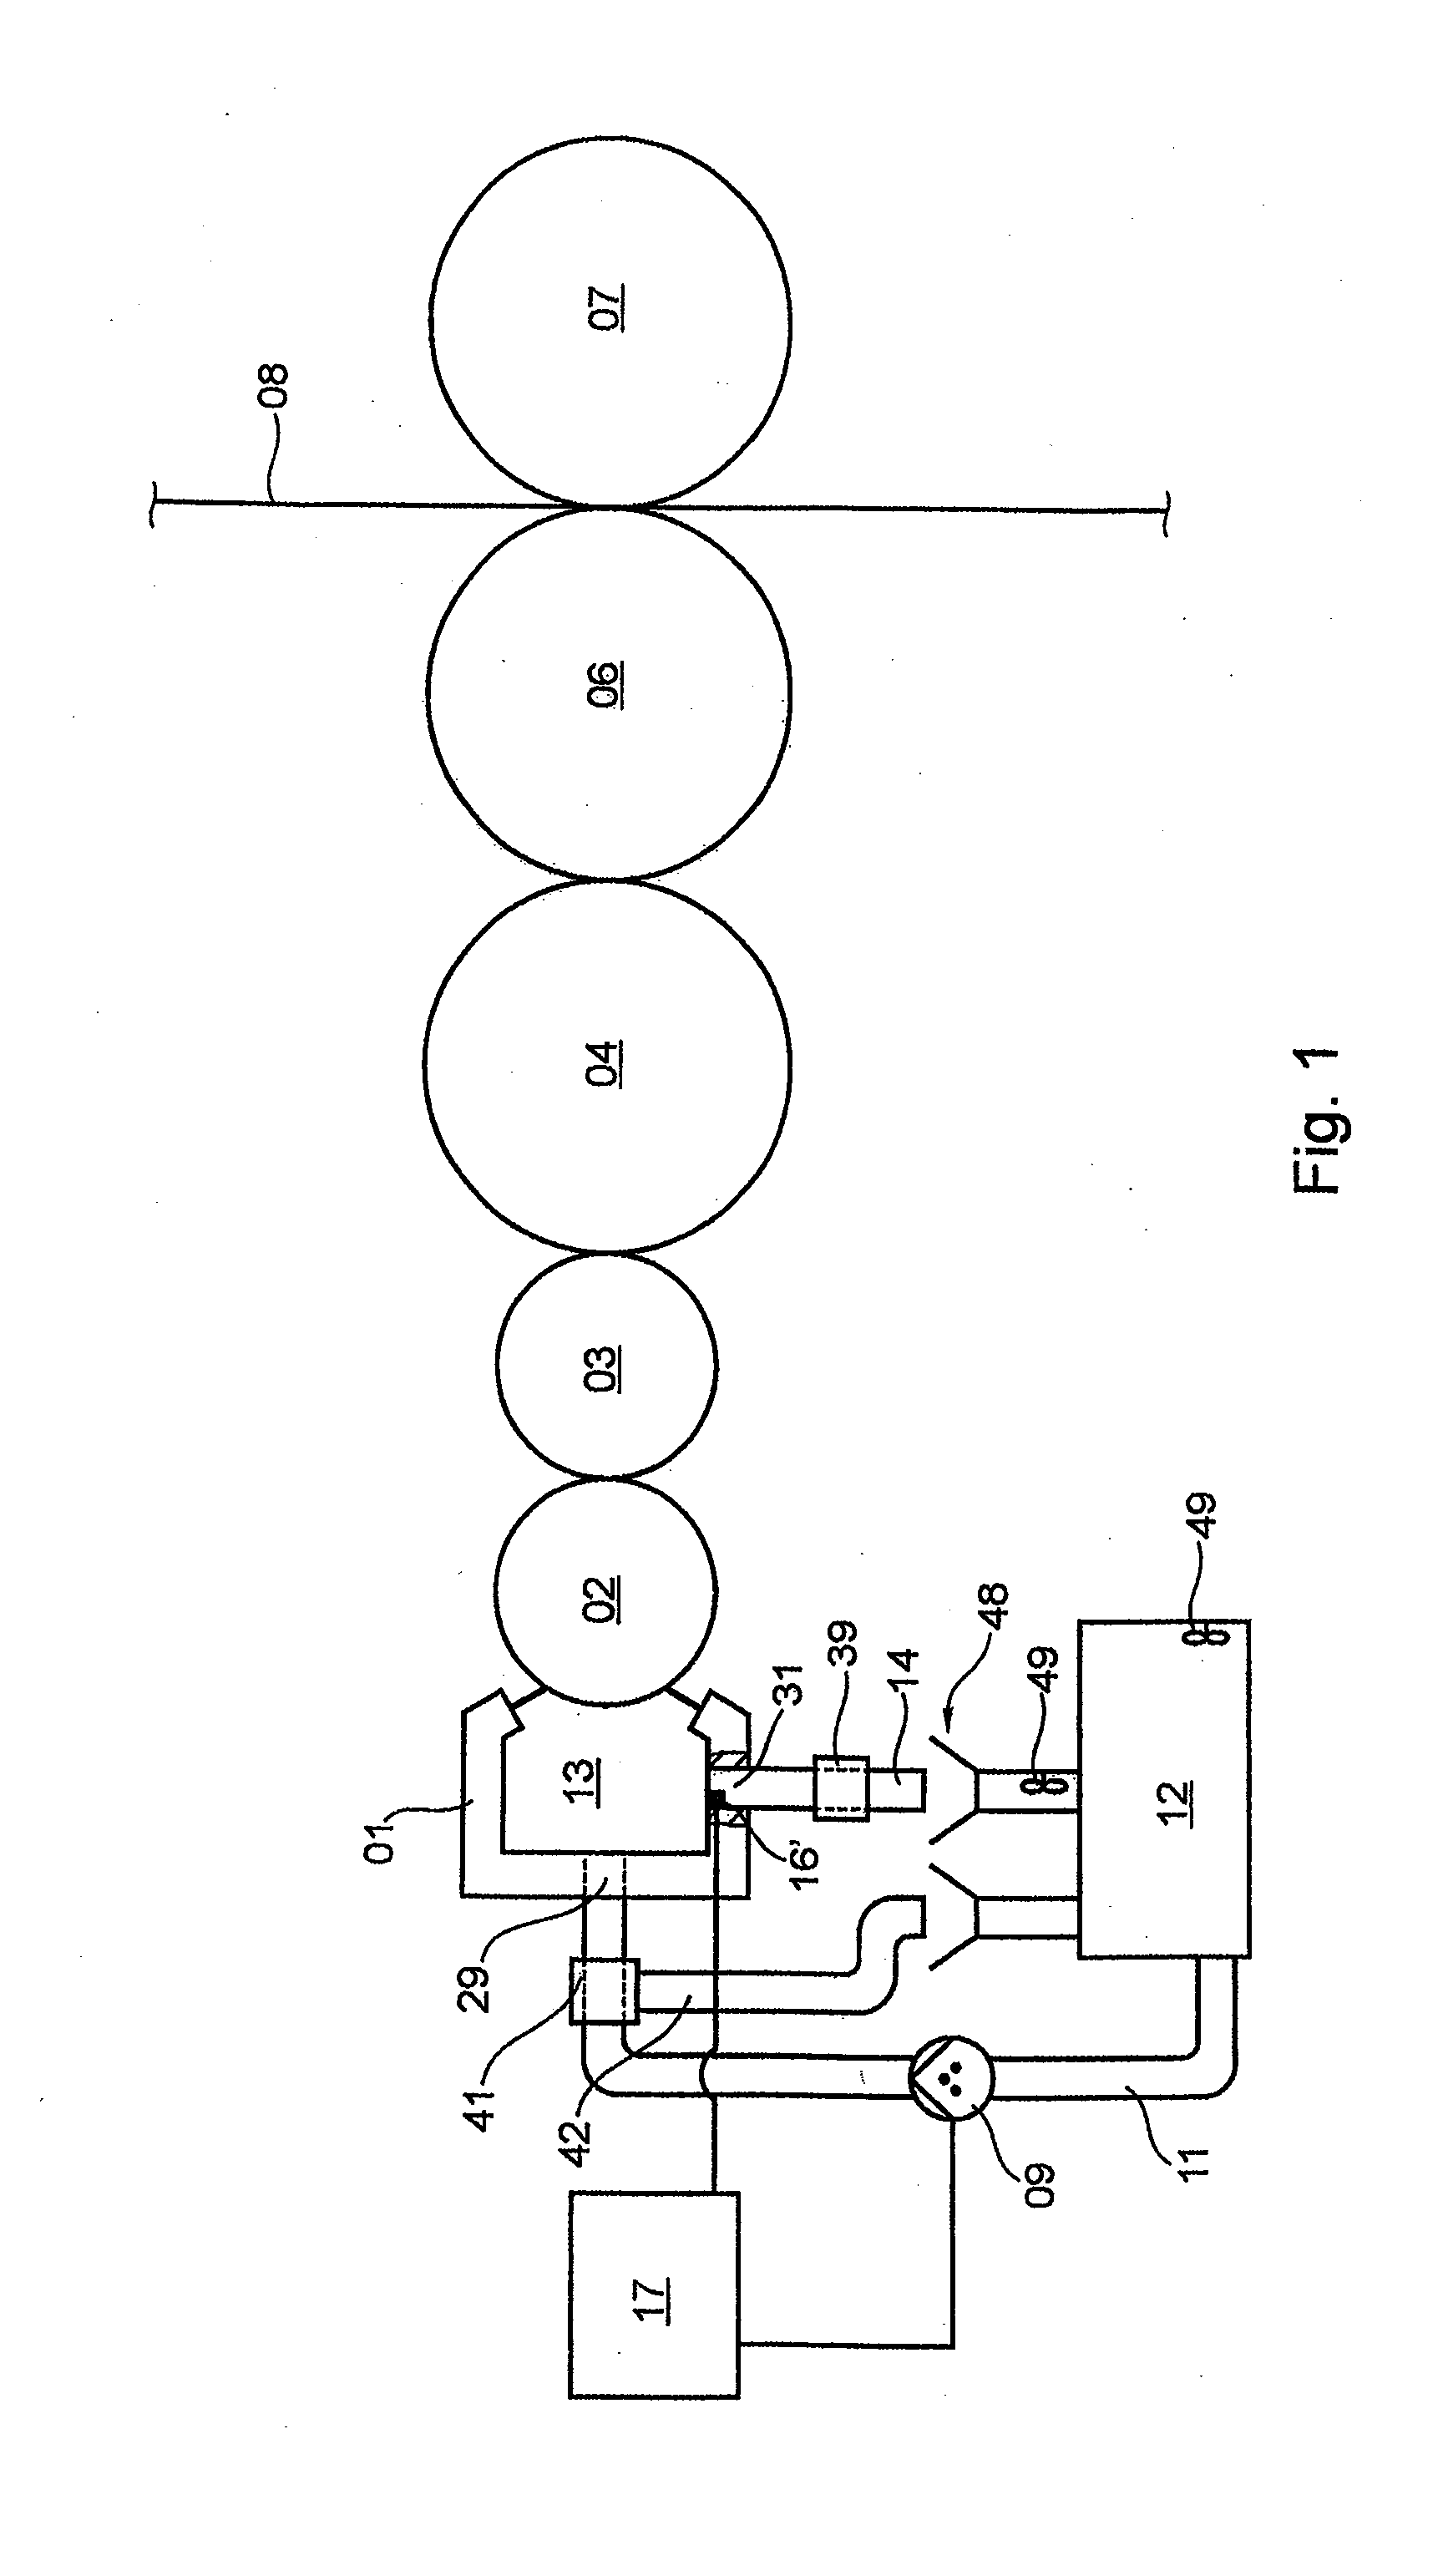 Pressure adjustment device of a chambered doctor blade system